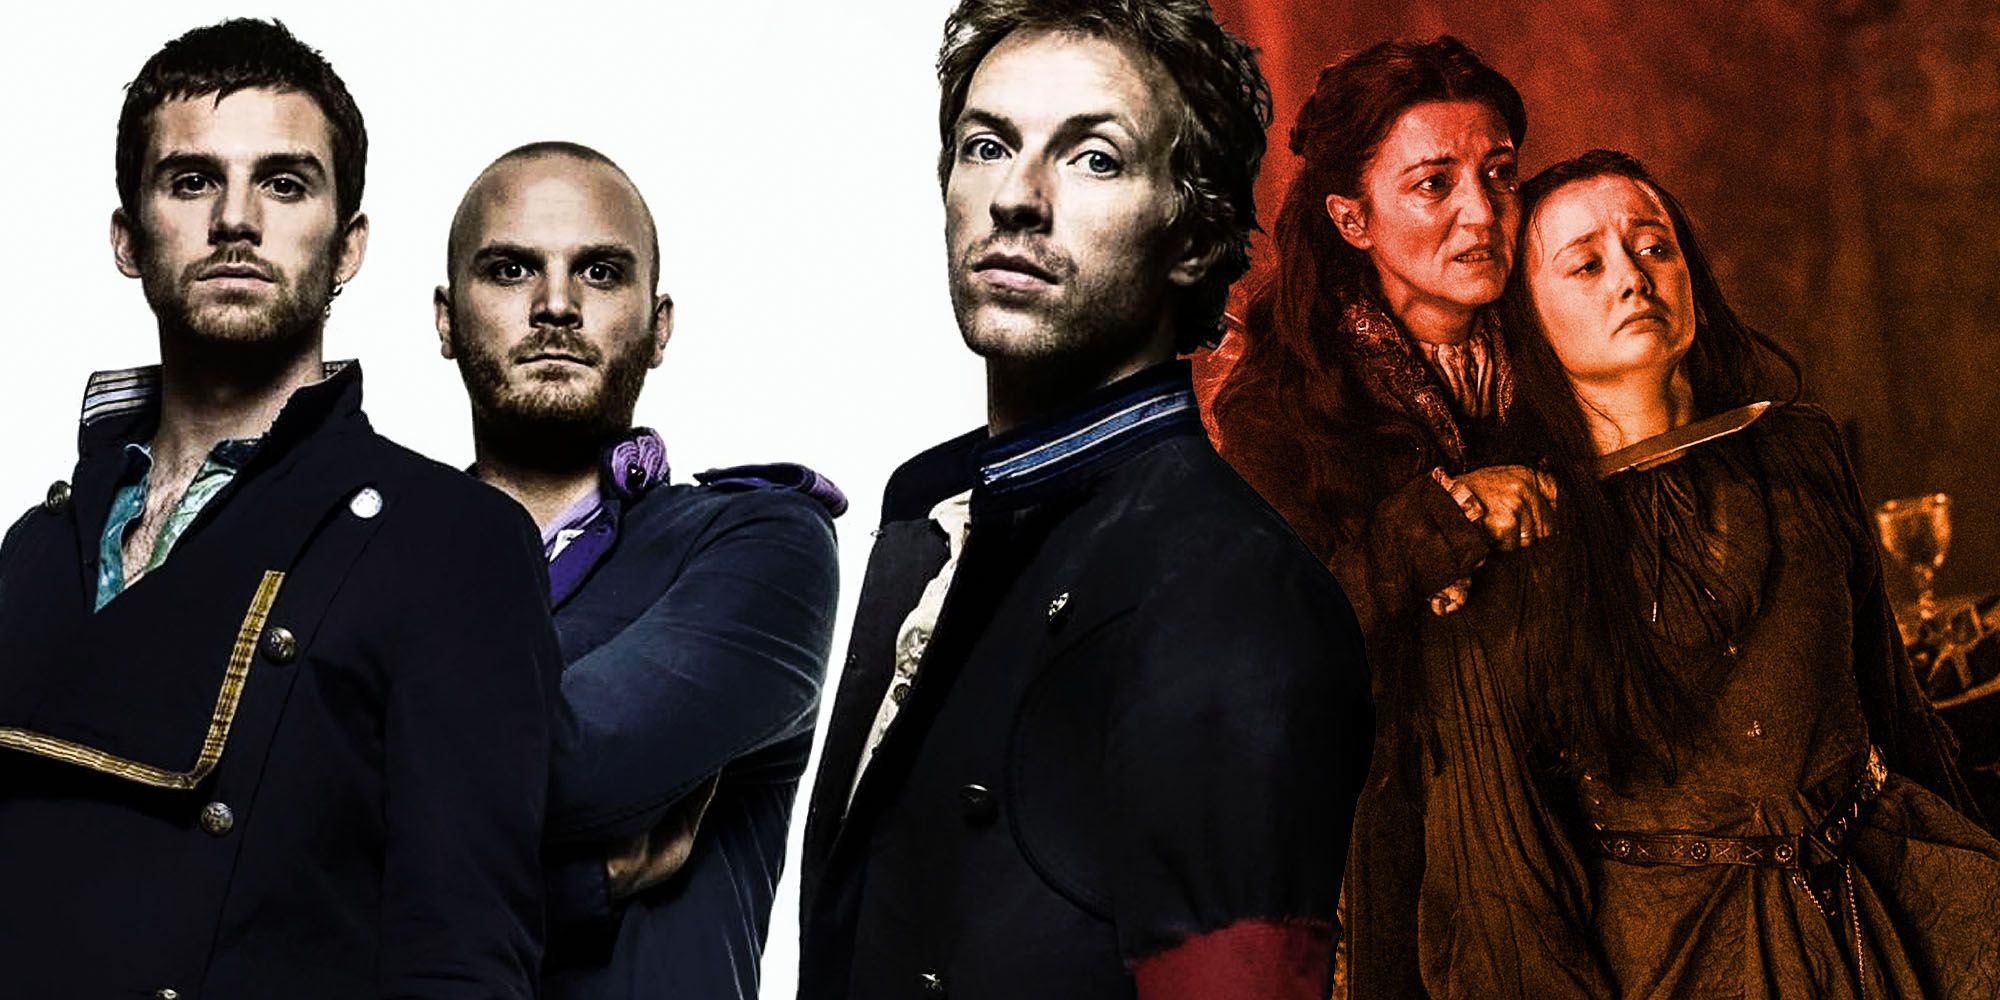 Game of Thrones' casts Coldplay drummer Will Champion in season 3